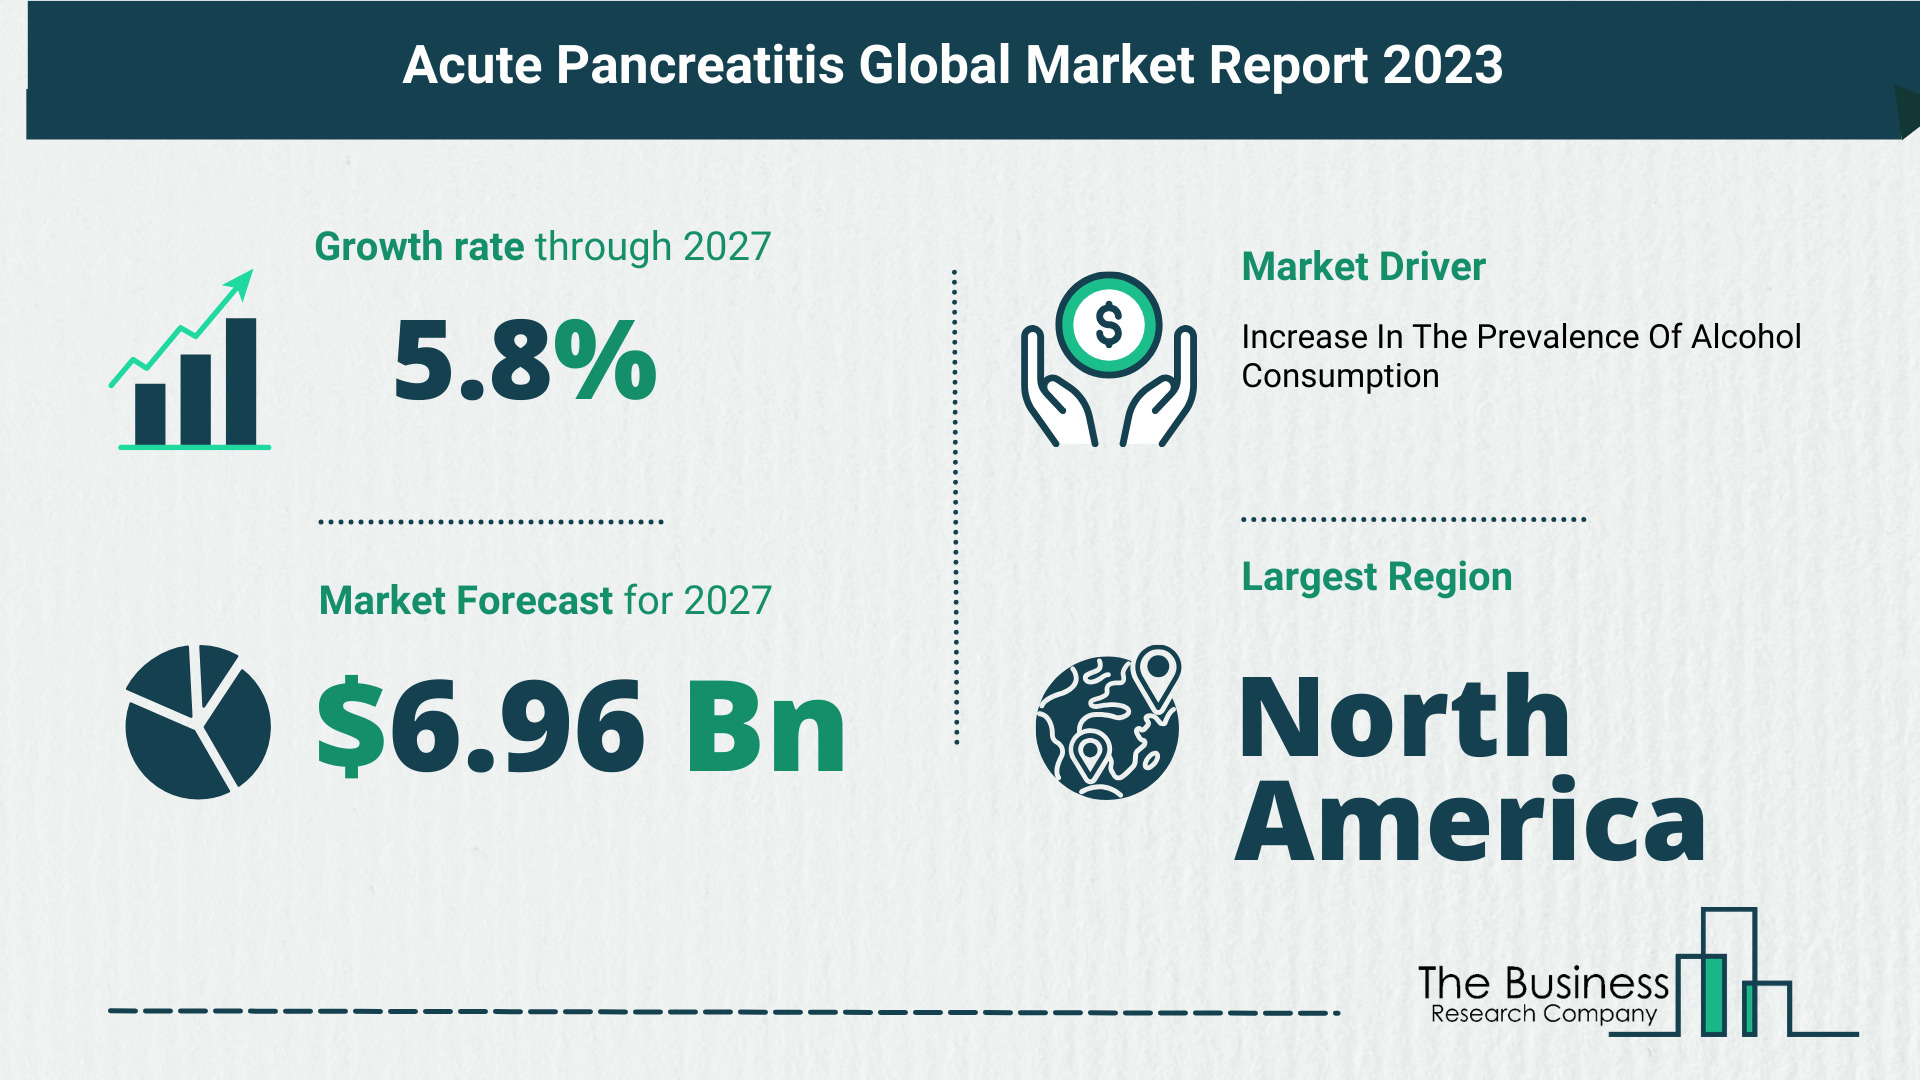 Comprehensive Analysis On Size, Share, And Drivers Of The Acute Pancreatitis Market